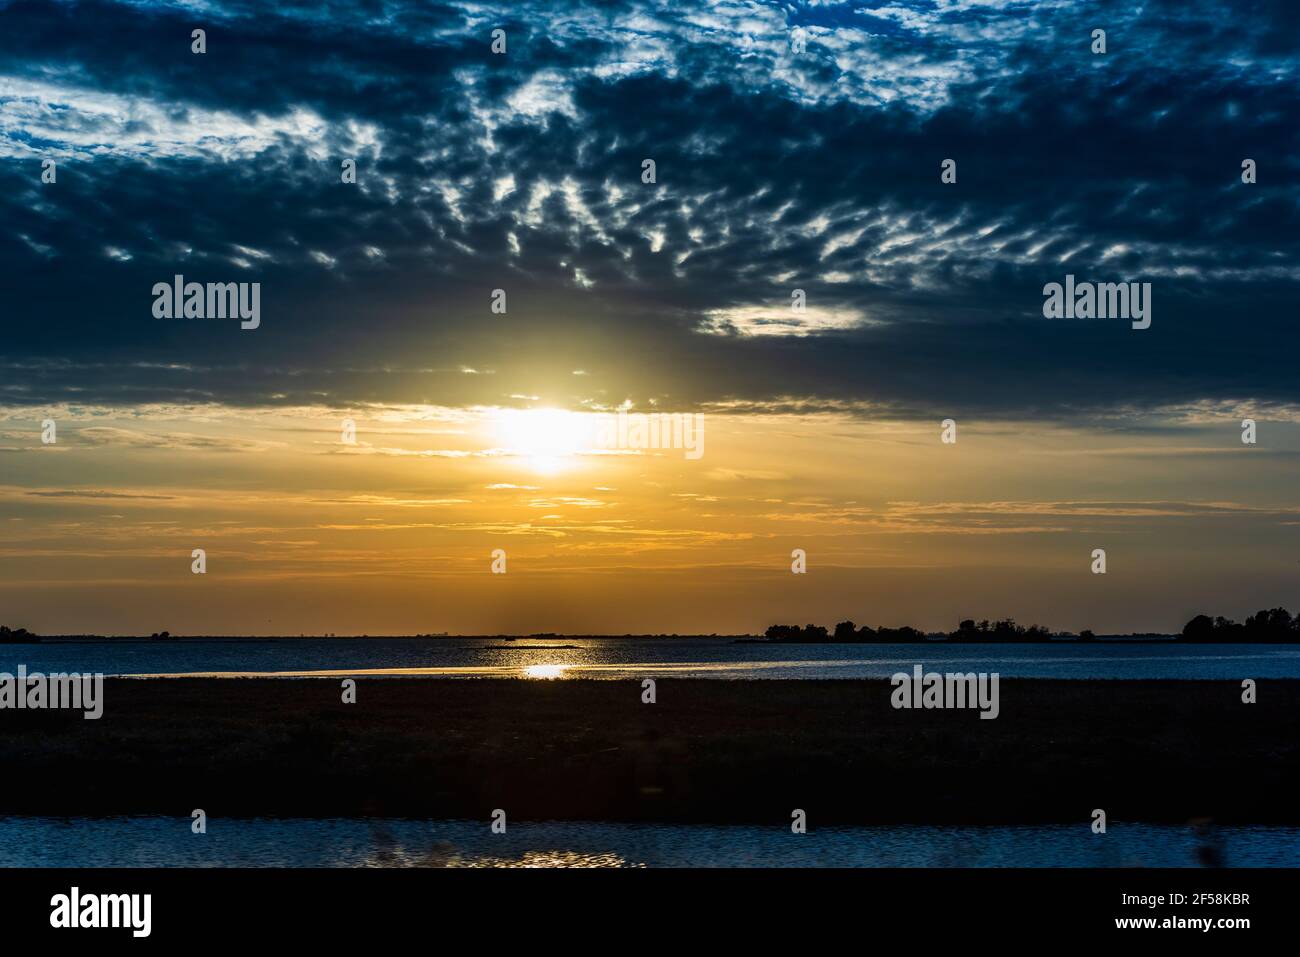 Grado and its lagoon at sunset. Glimpses of tranquility Stock Photo - Alamy